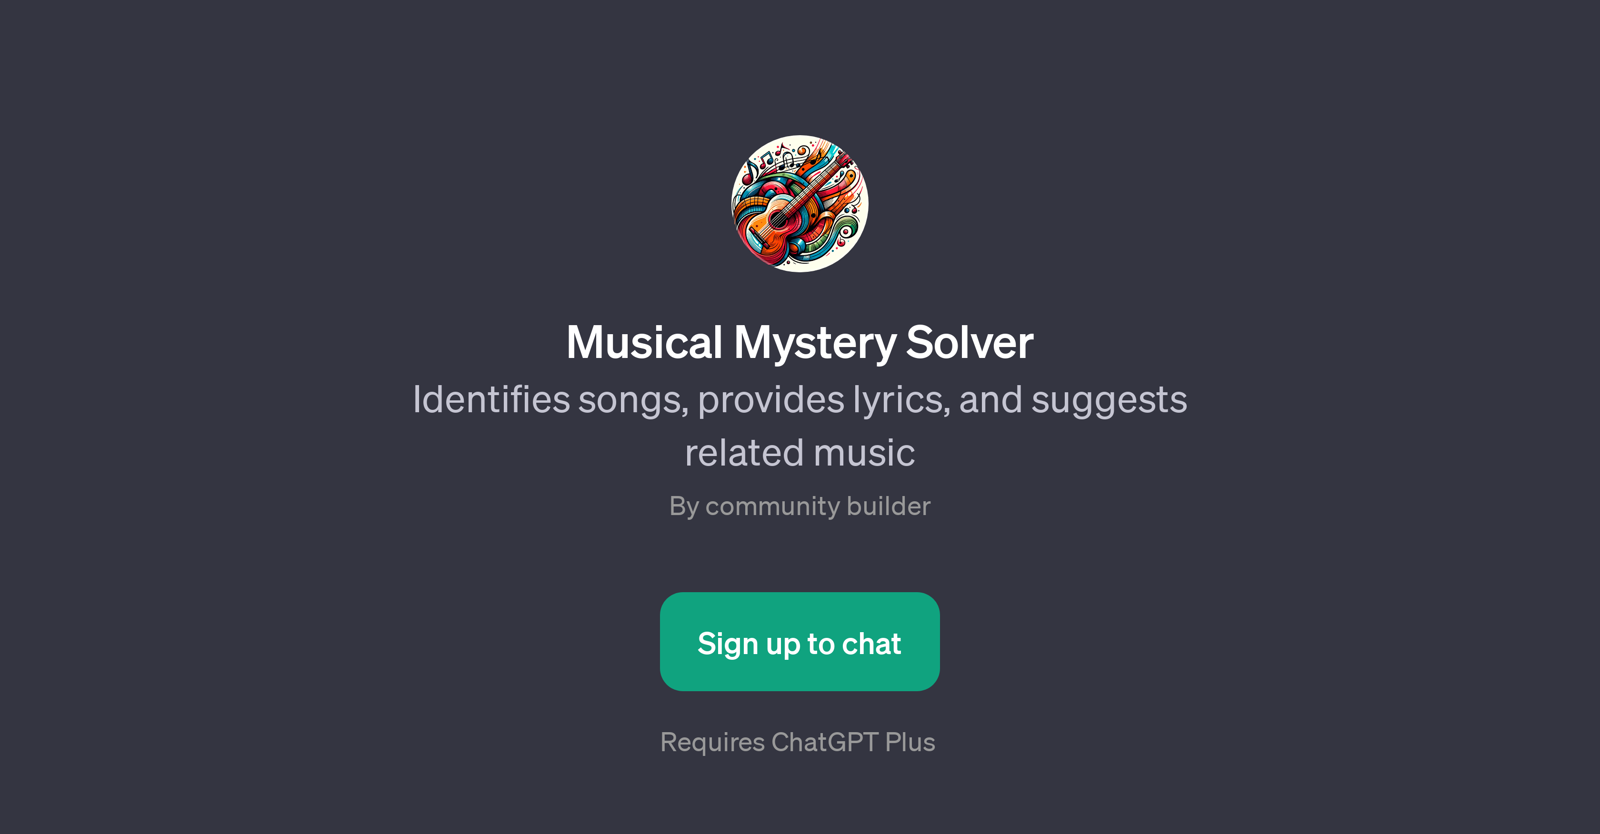 Musical Mystery Solver website